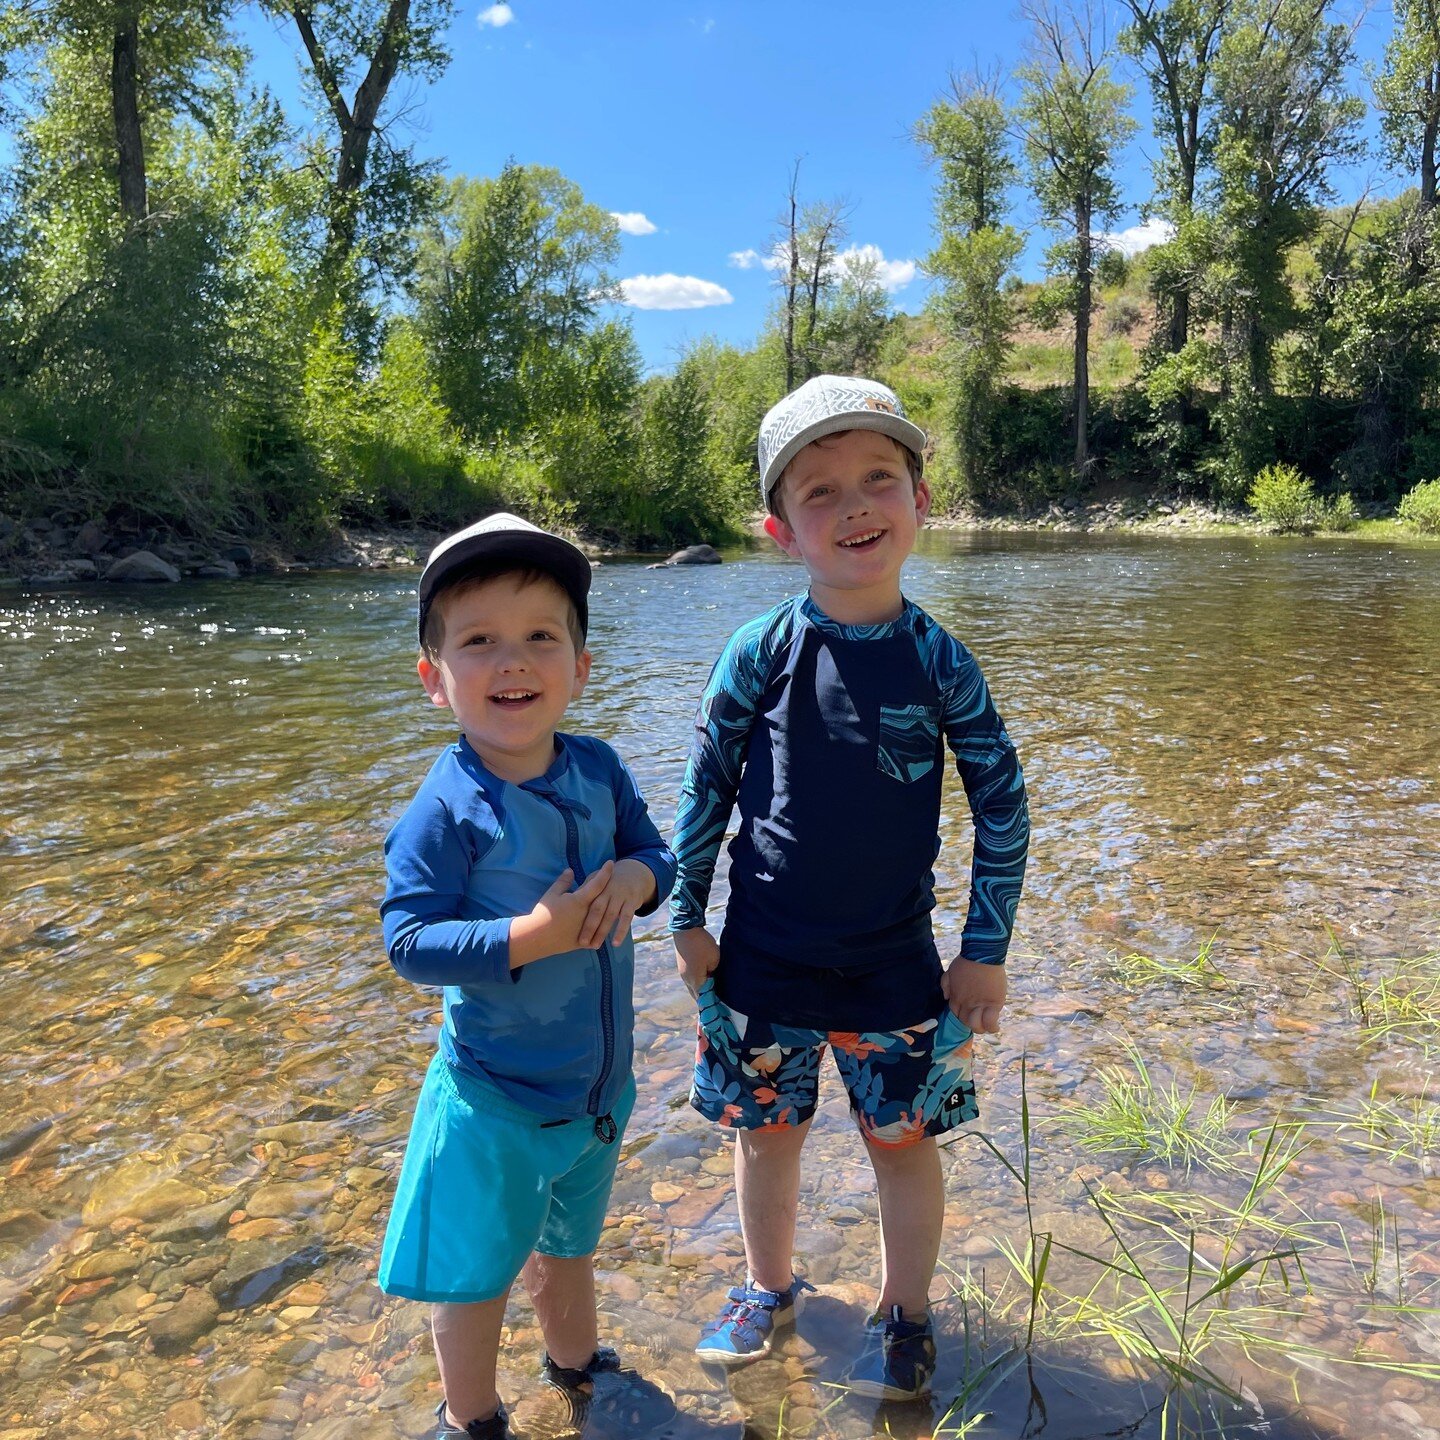 Brady and Bennett rocking #Reima while enjoying the river! Playing it safe with 50+ UV protection. Stay cool B &amp; B!